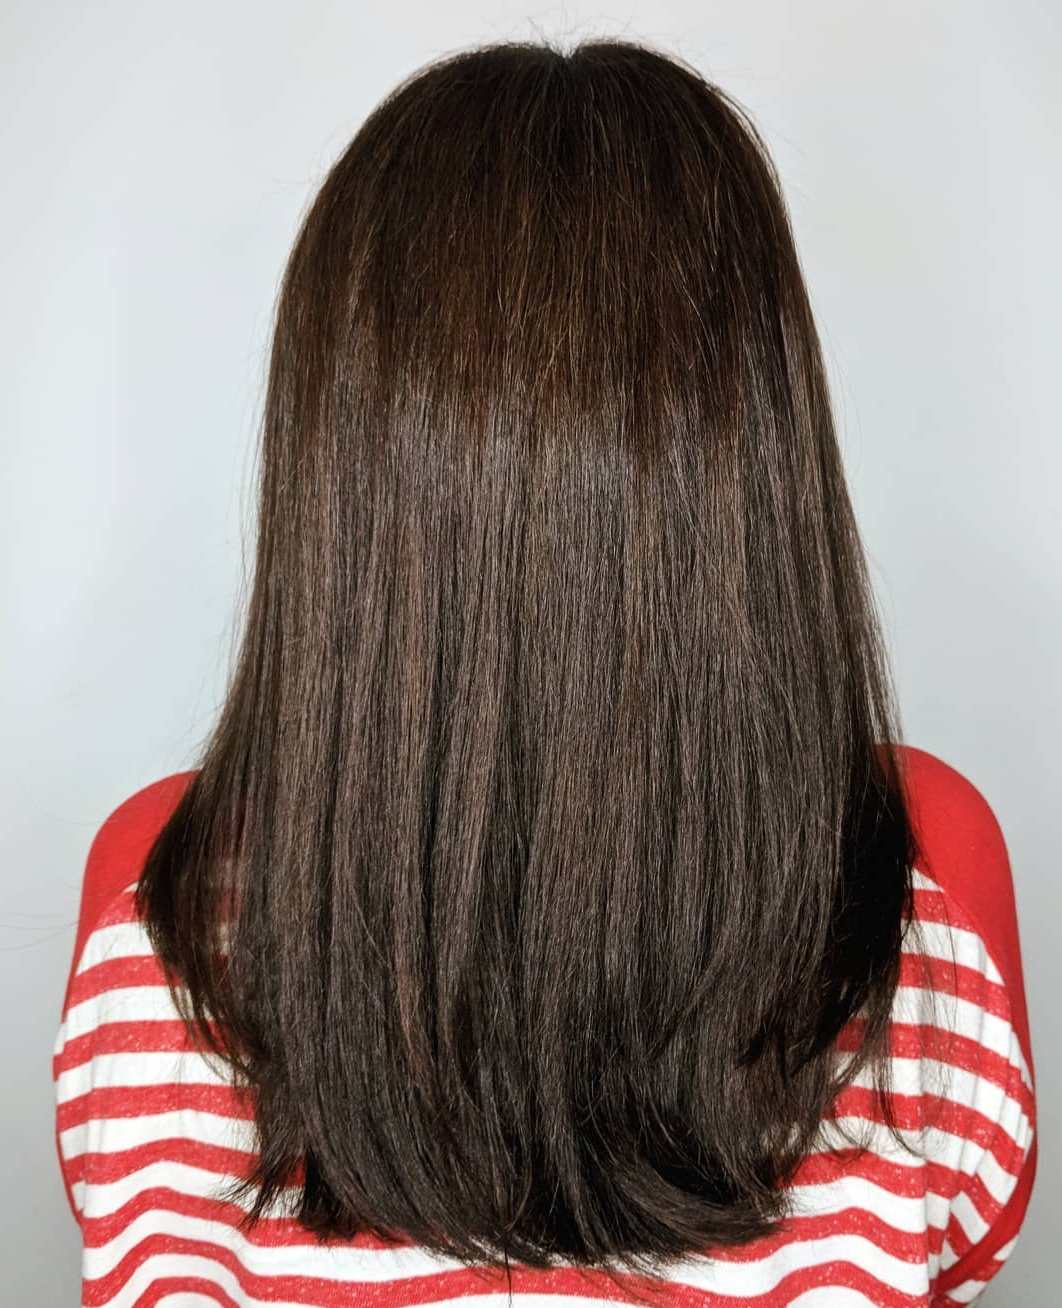 Long Haircut With Blunt Ends